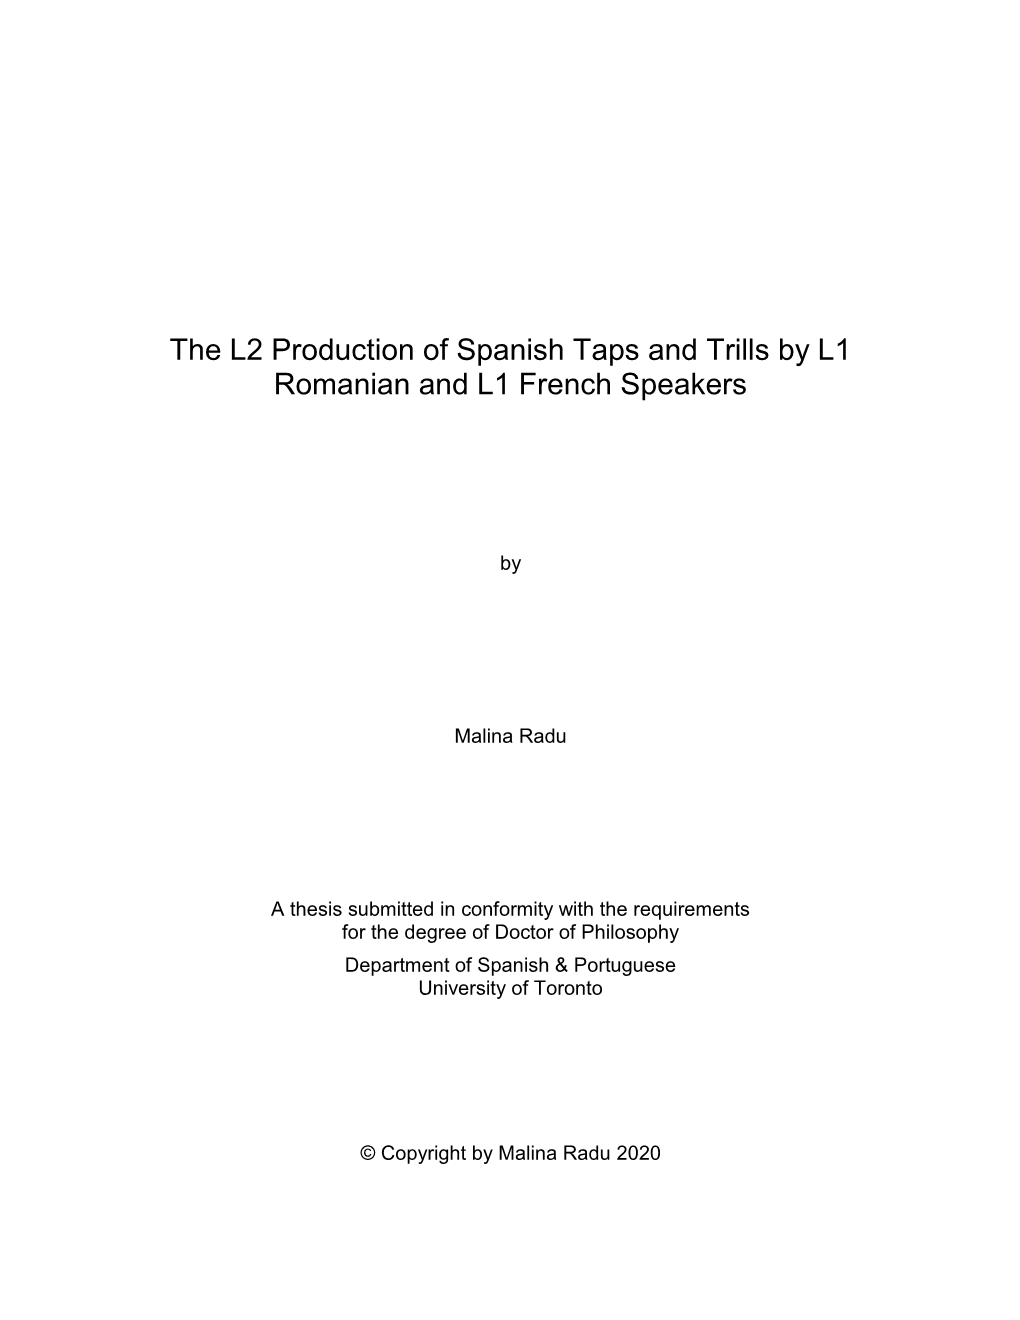 The L2 Production of Spanish Taps and Trills by L1 Romanian and L1 French Speakers